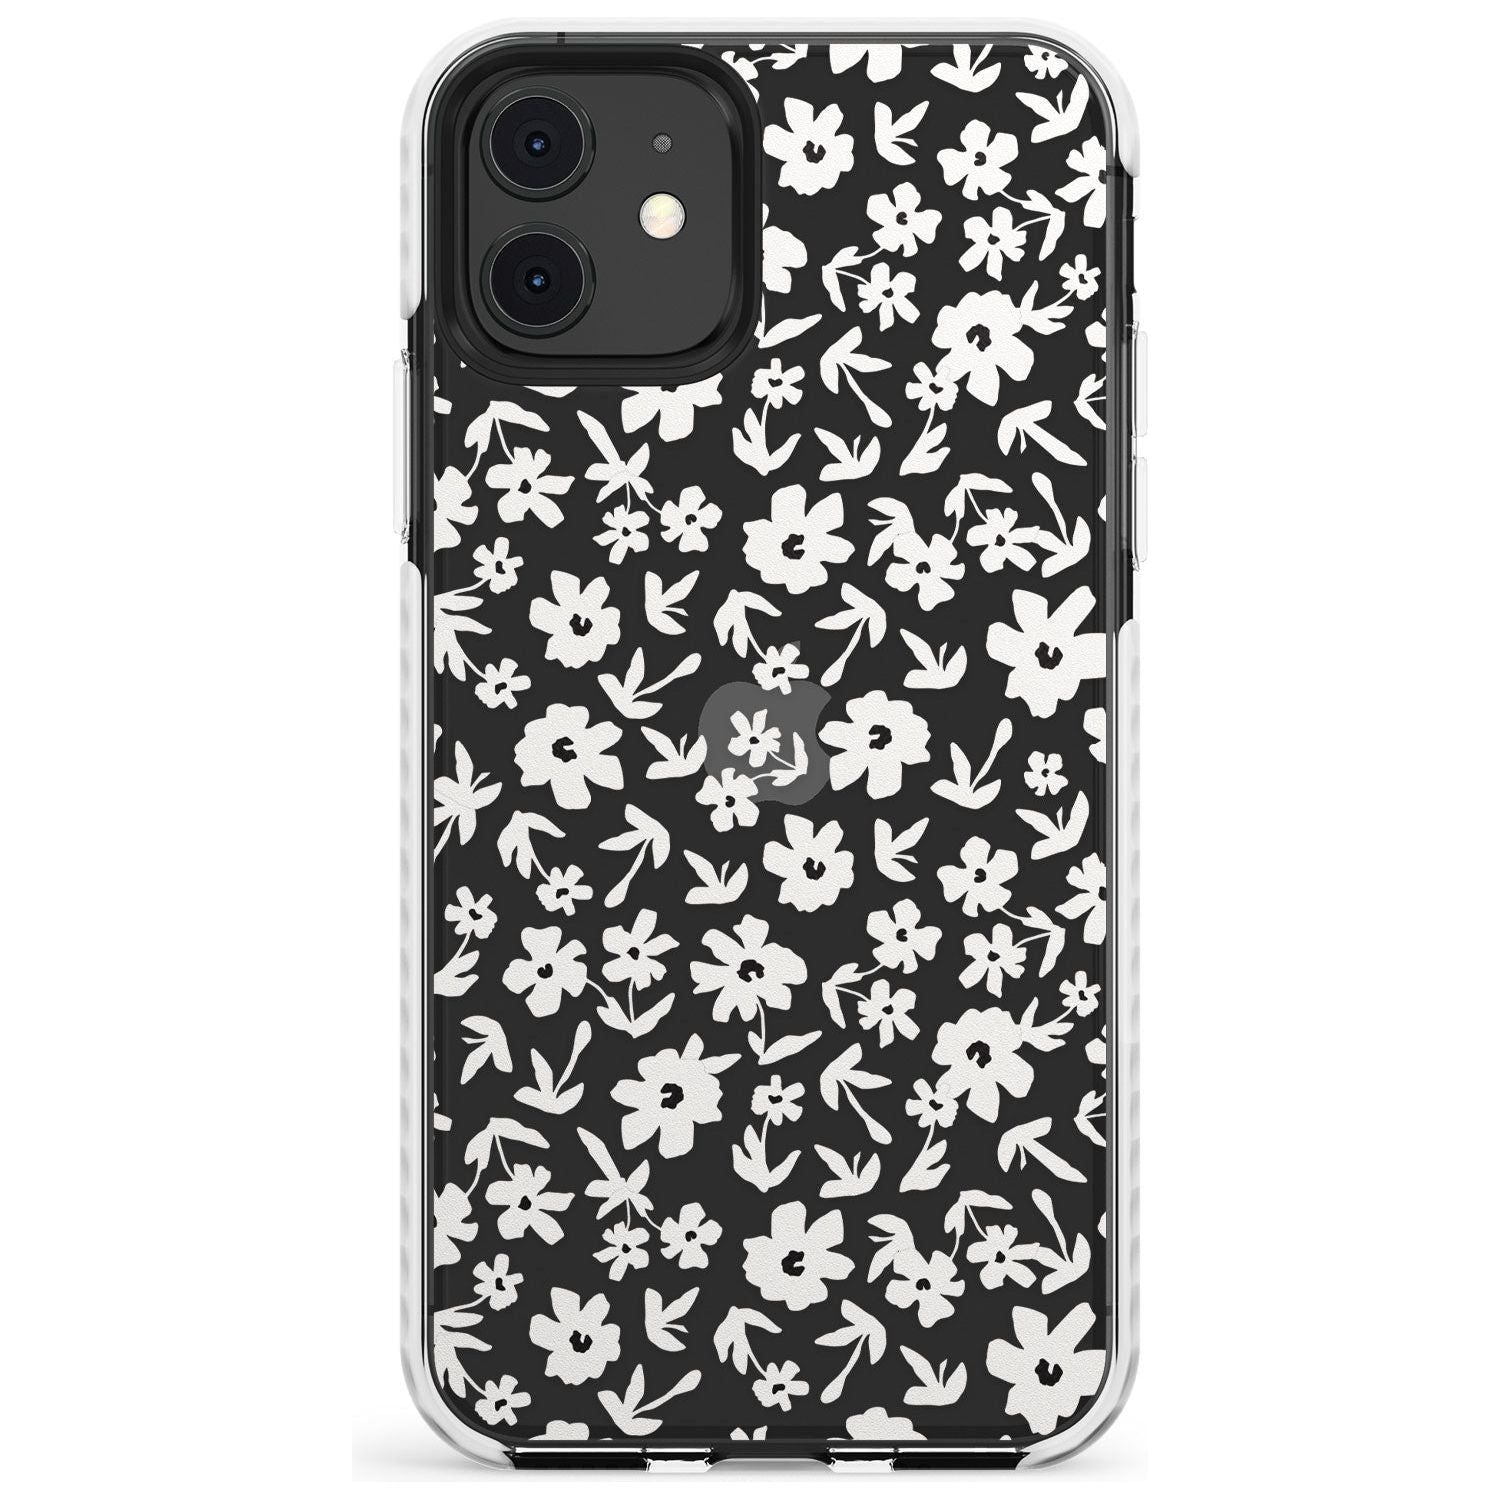 Floral Print on Clear - Cute Floral Design Slim TPU Phone Case for iPhone 11